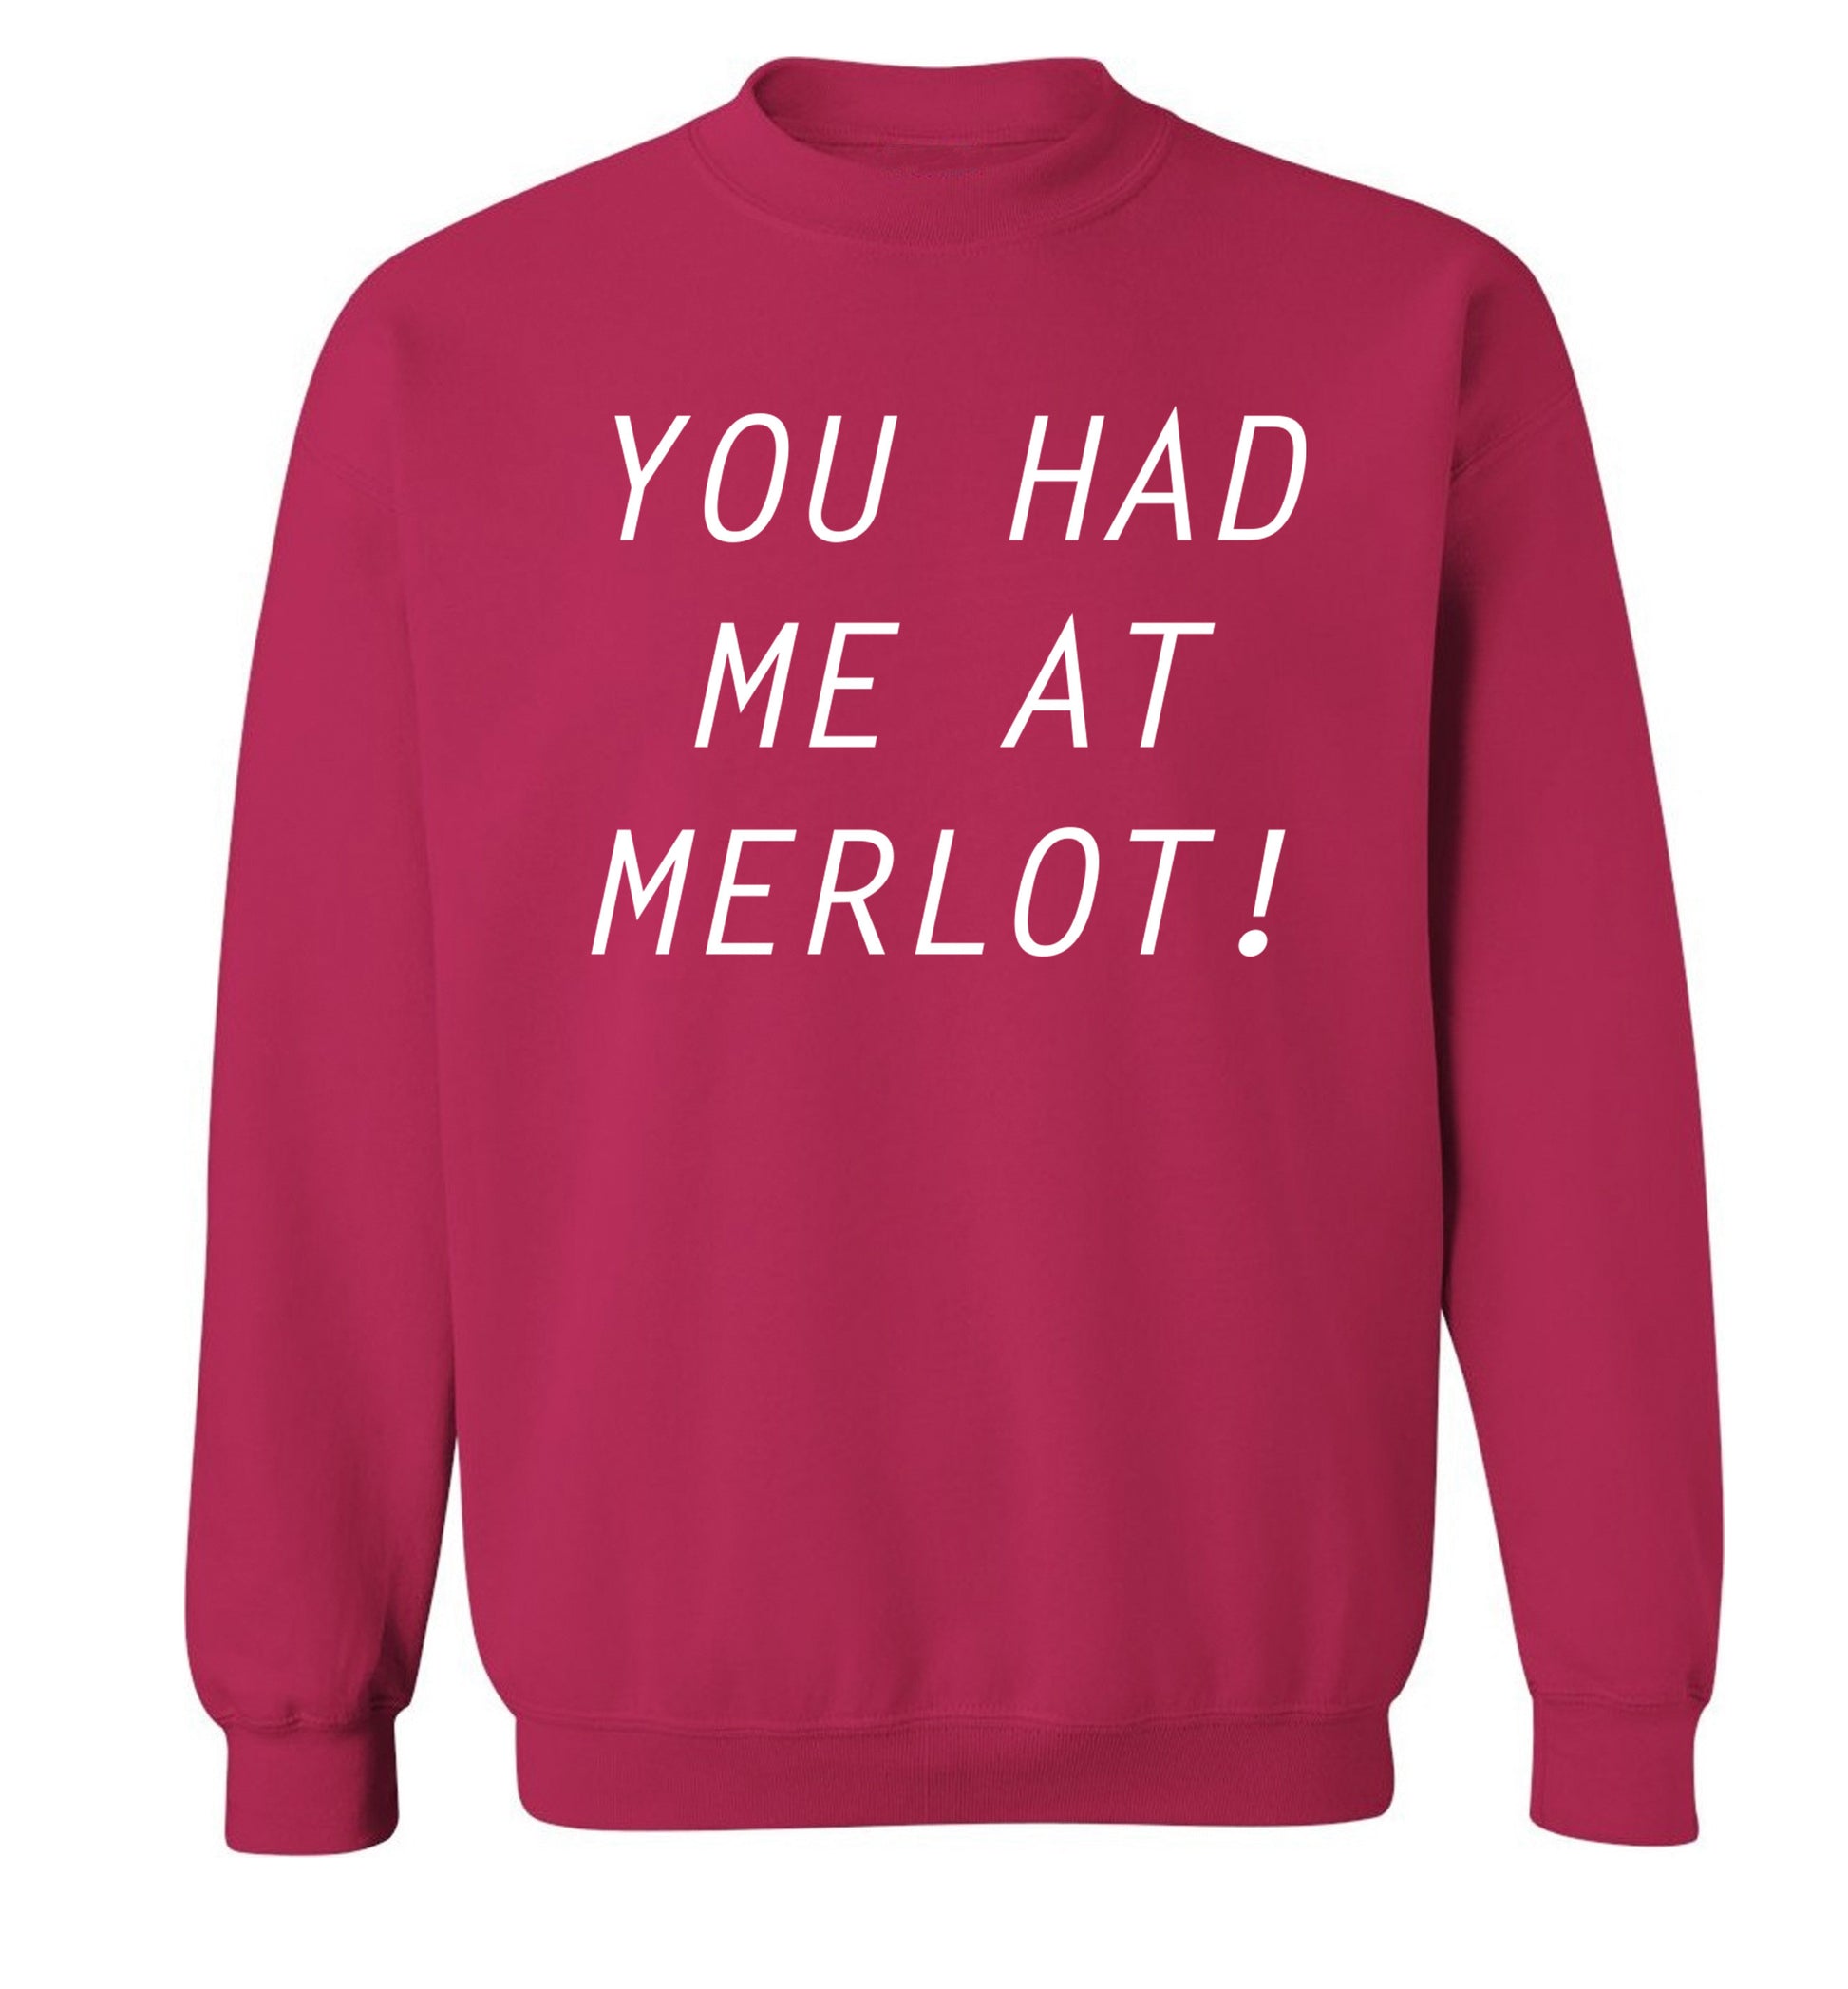 You had me at merlot Adult's unisex pink Sweater 2XL